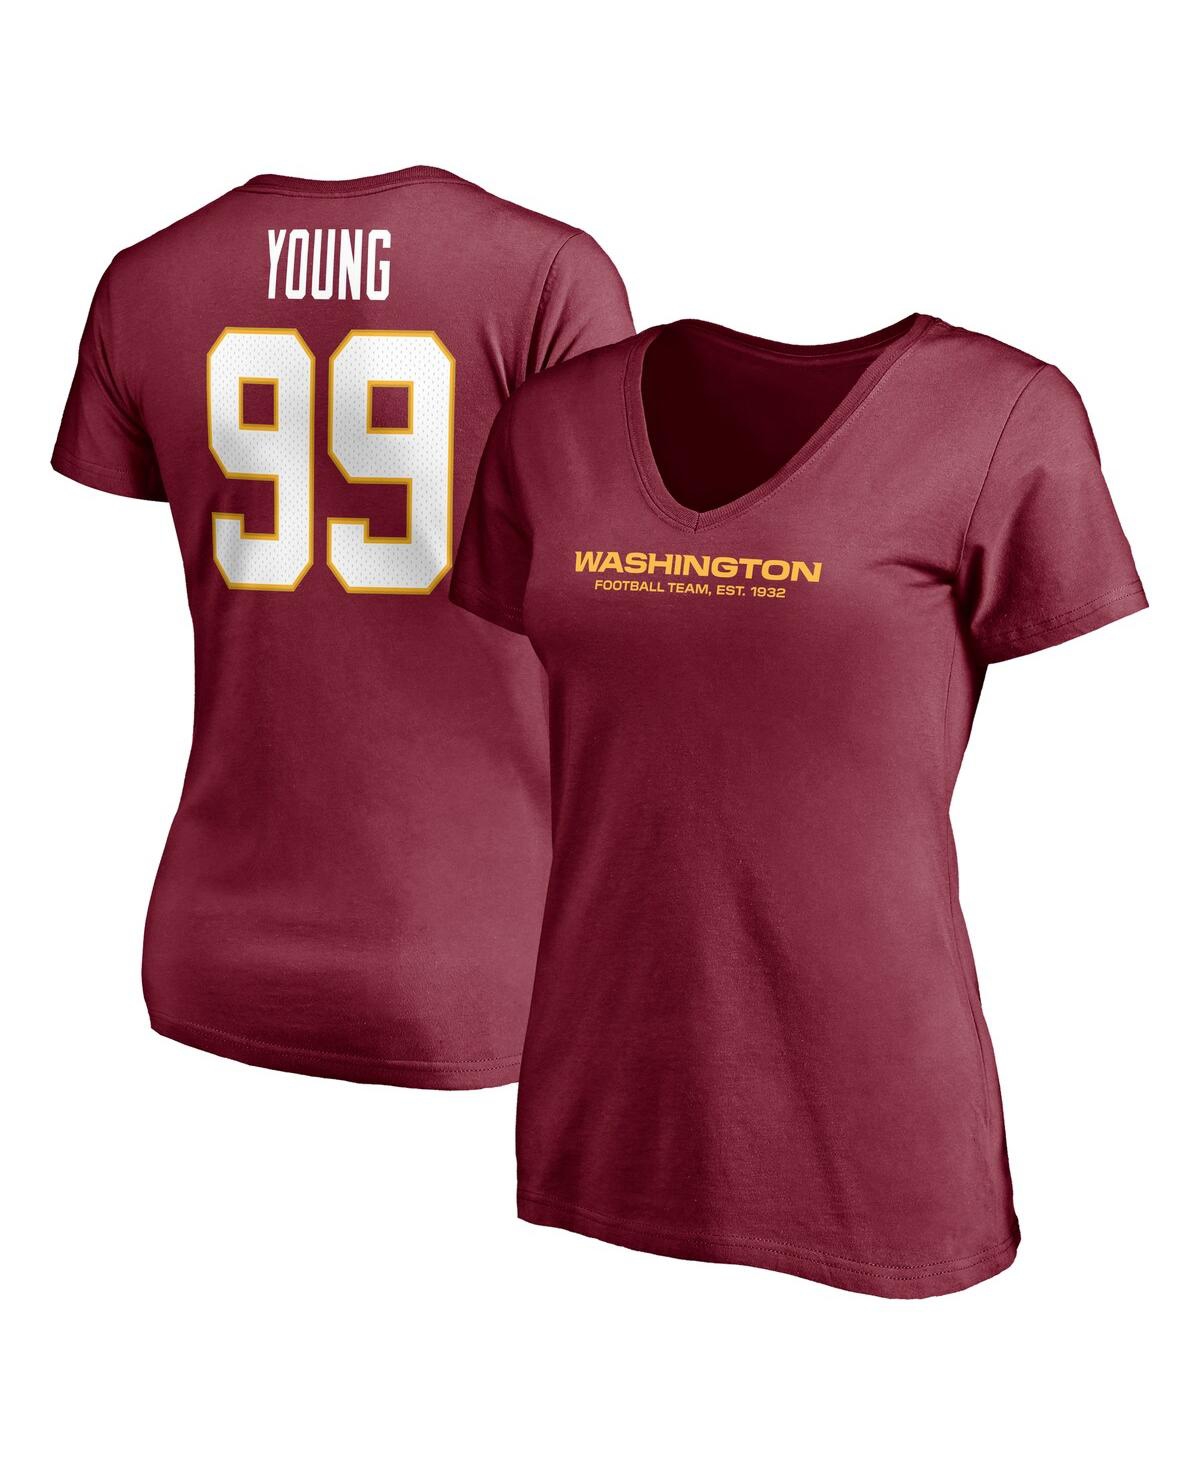 FANATICS WOMEN'S FANATICS CHASE YOUNG BURGUNDY WASHINGTON FOOTBALL TEAM PLAYER ICON NAME AND NUMBER V-NECK T-